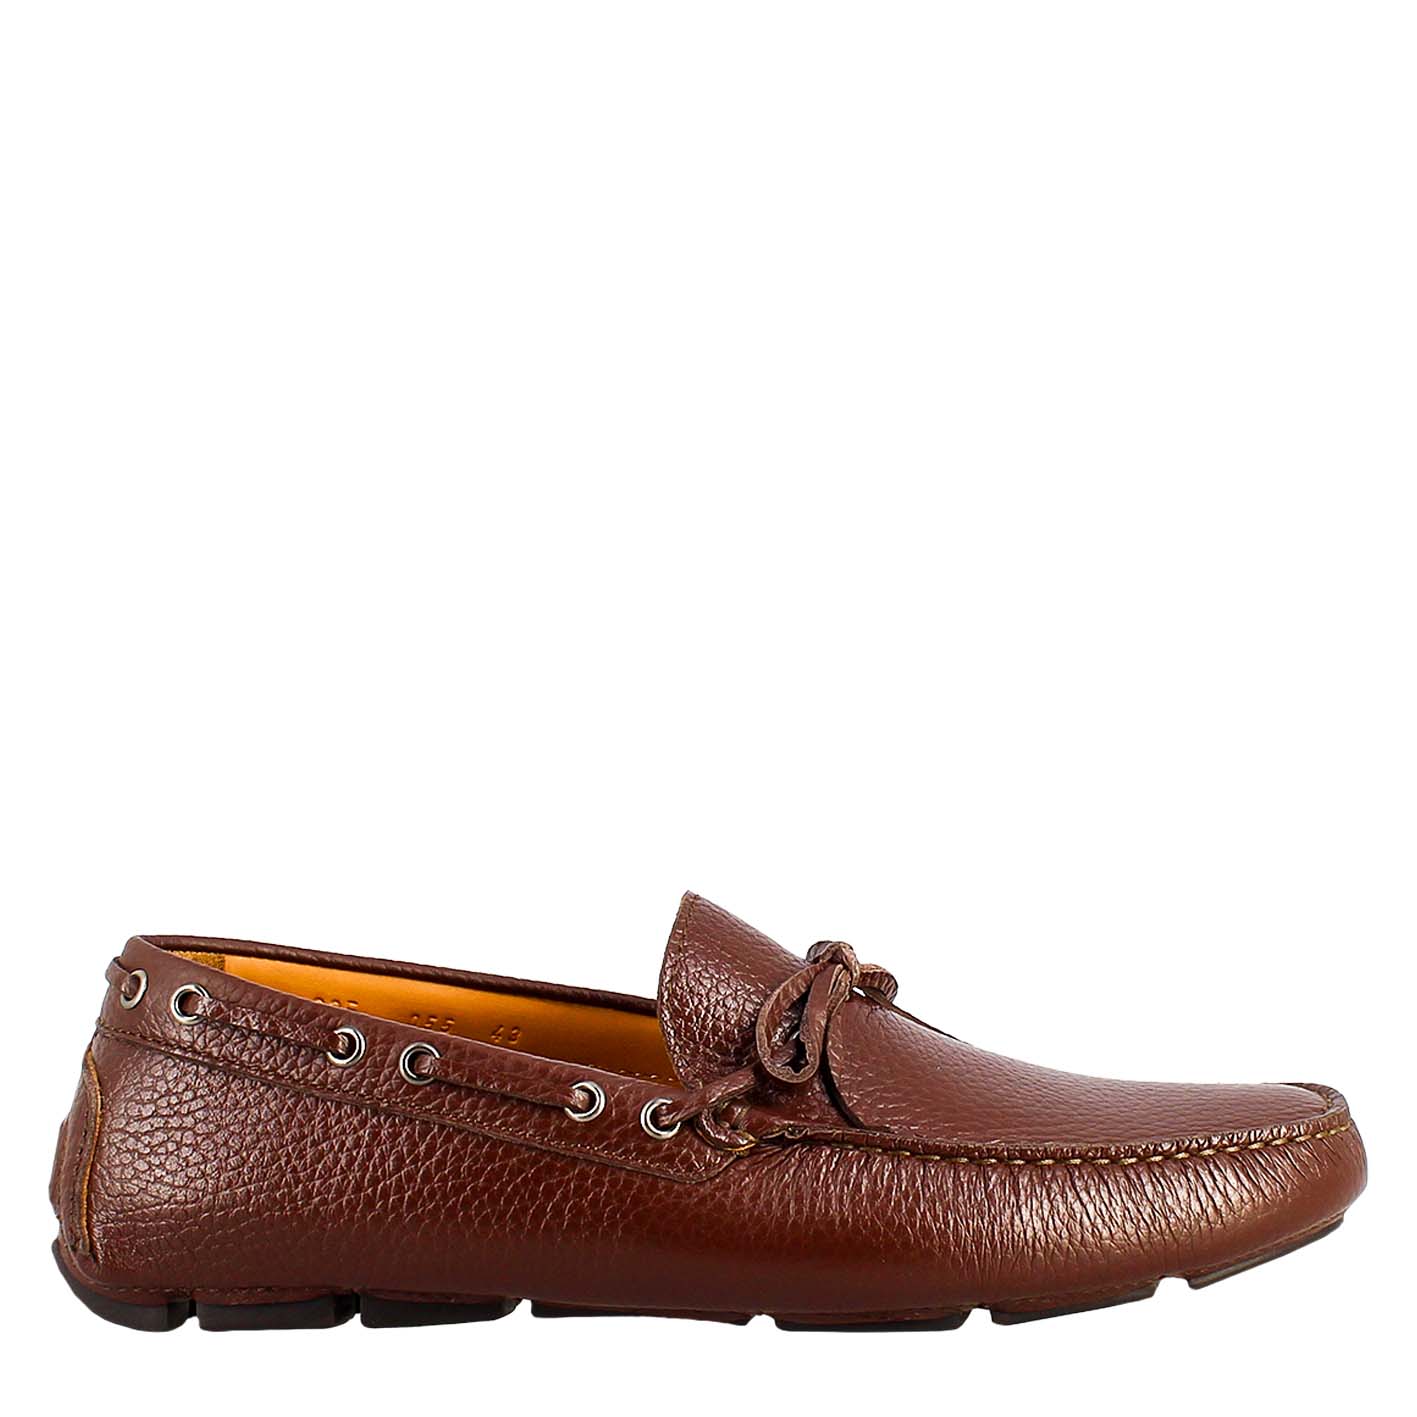 Carshoe Loafers Brown Calf LEATHER